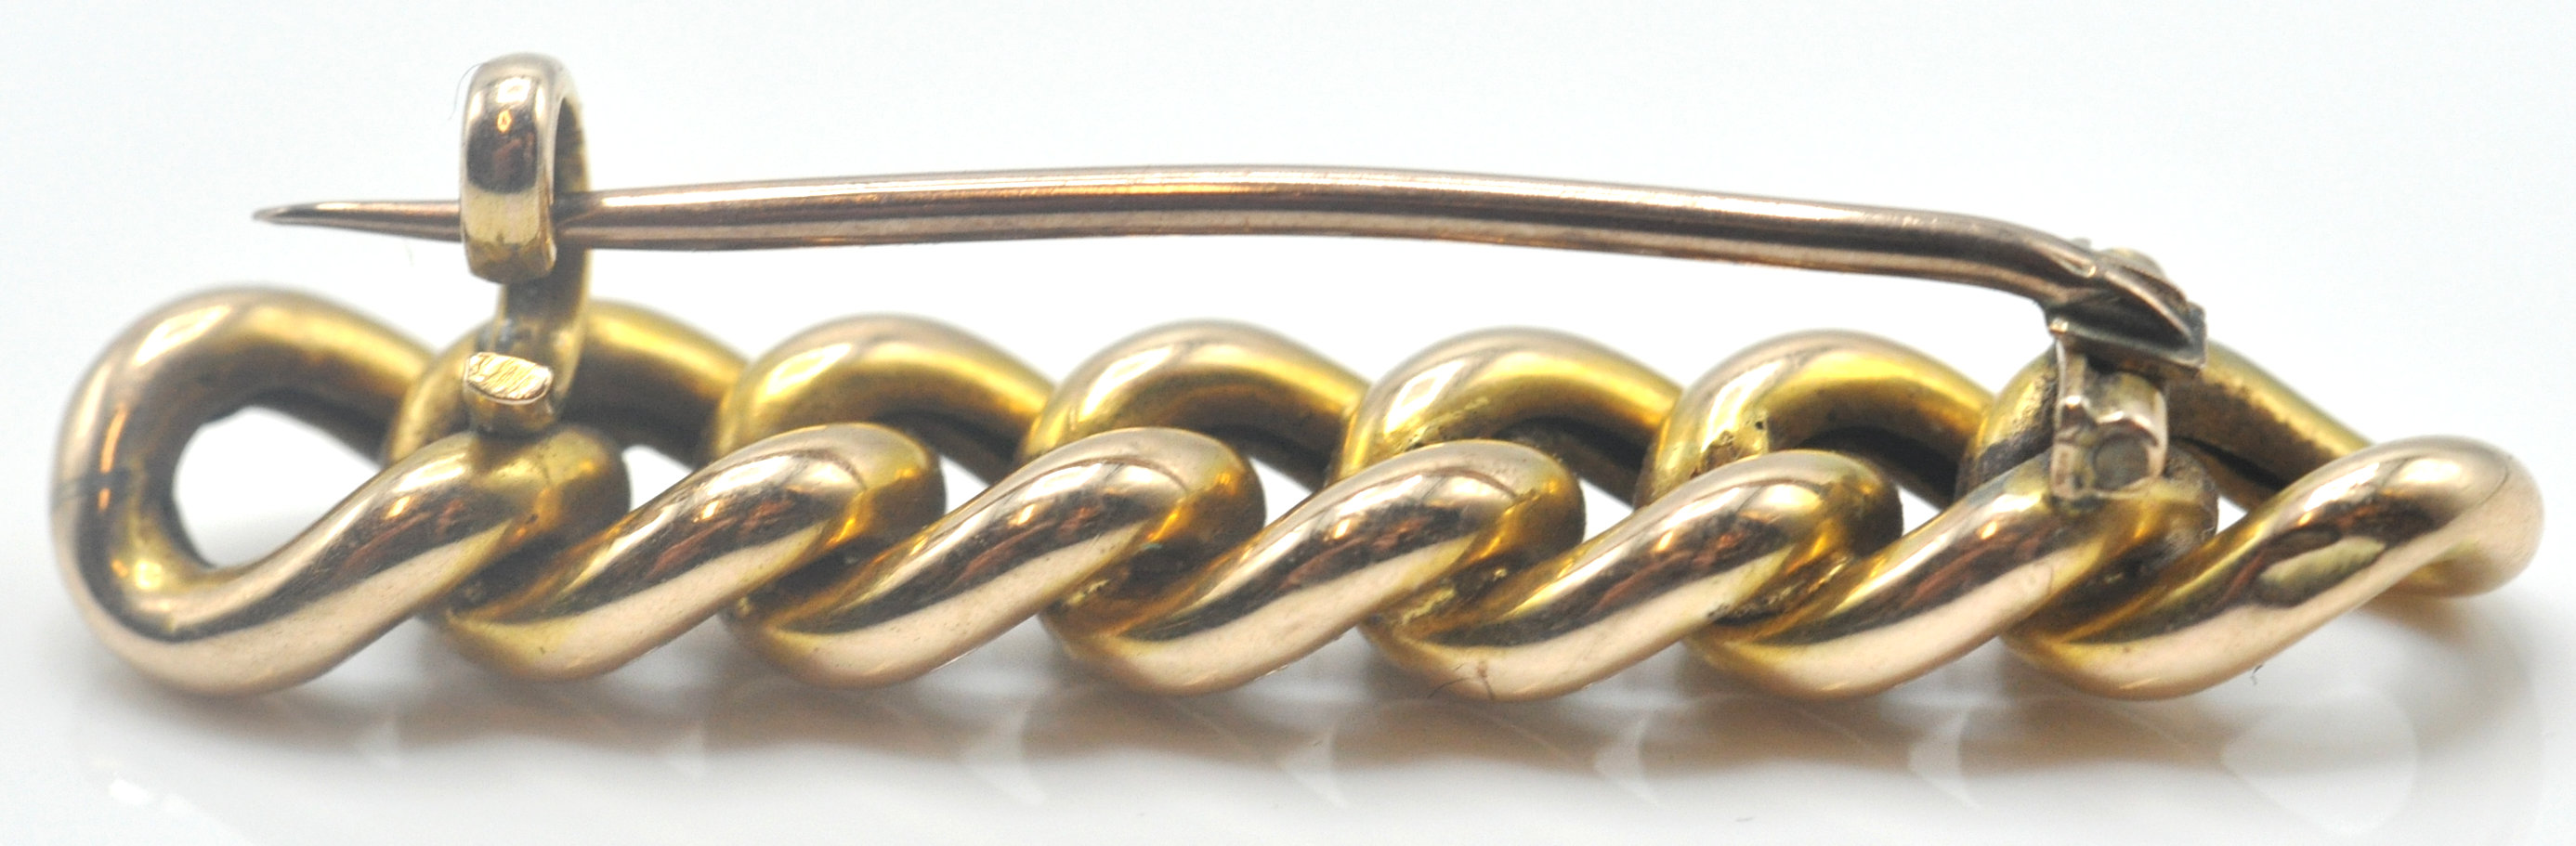 9CT GOLD CURB LINK BAR BROOCH - Image 4 of 4